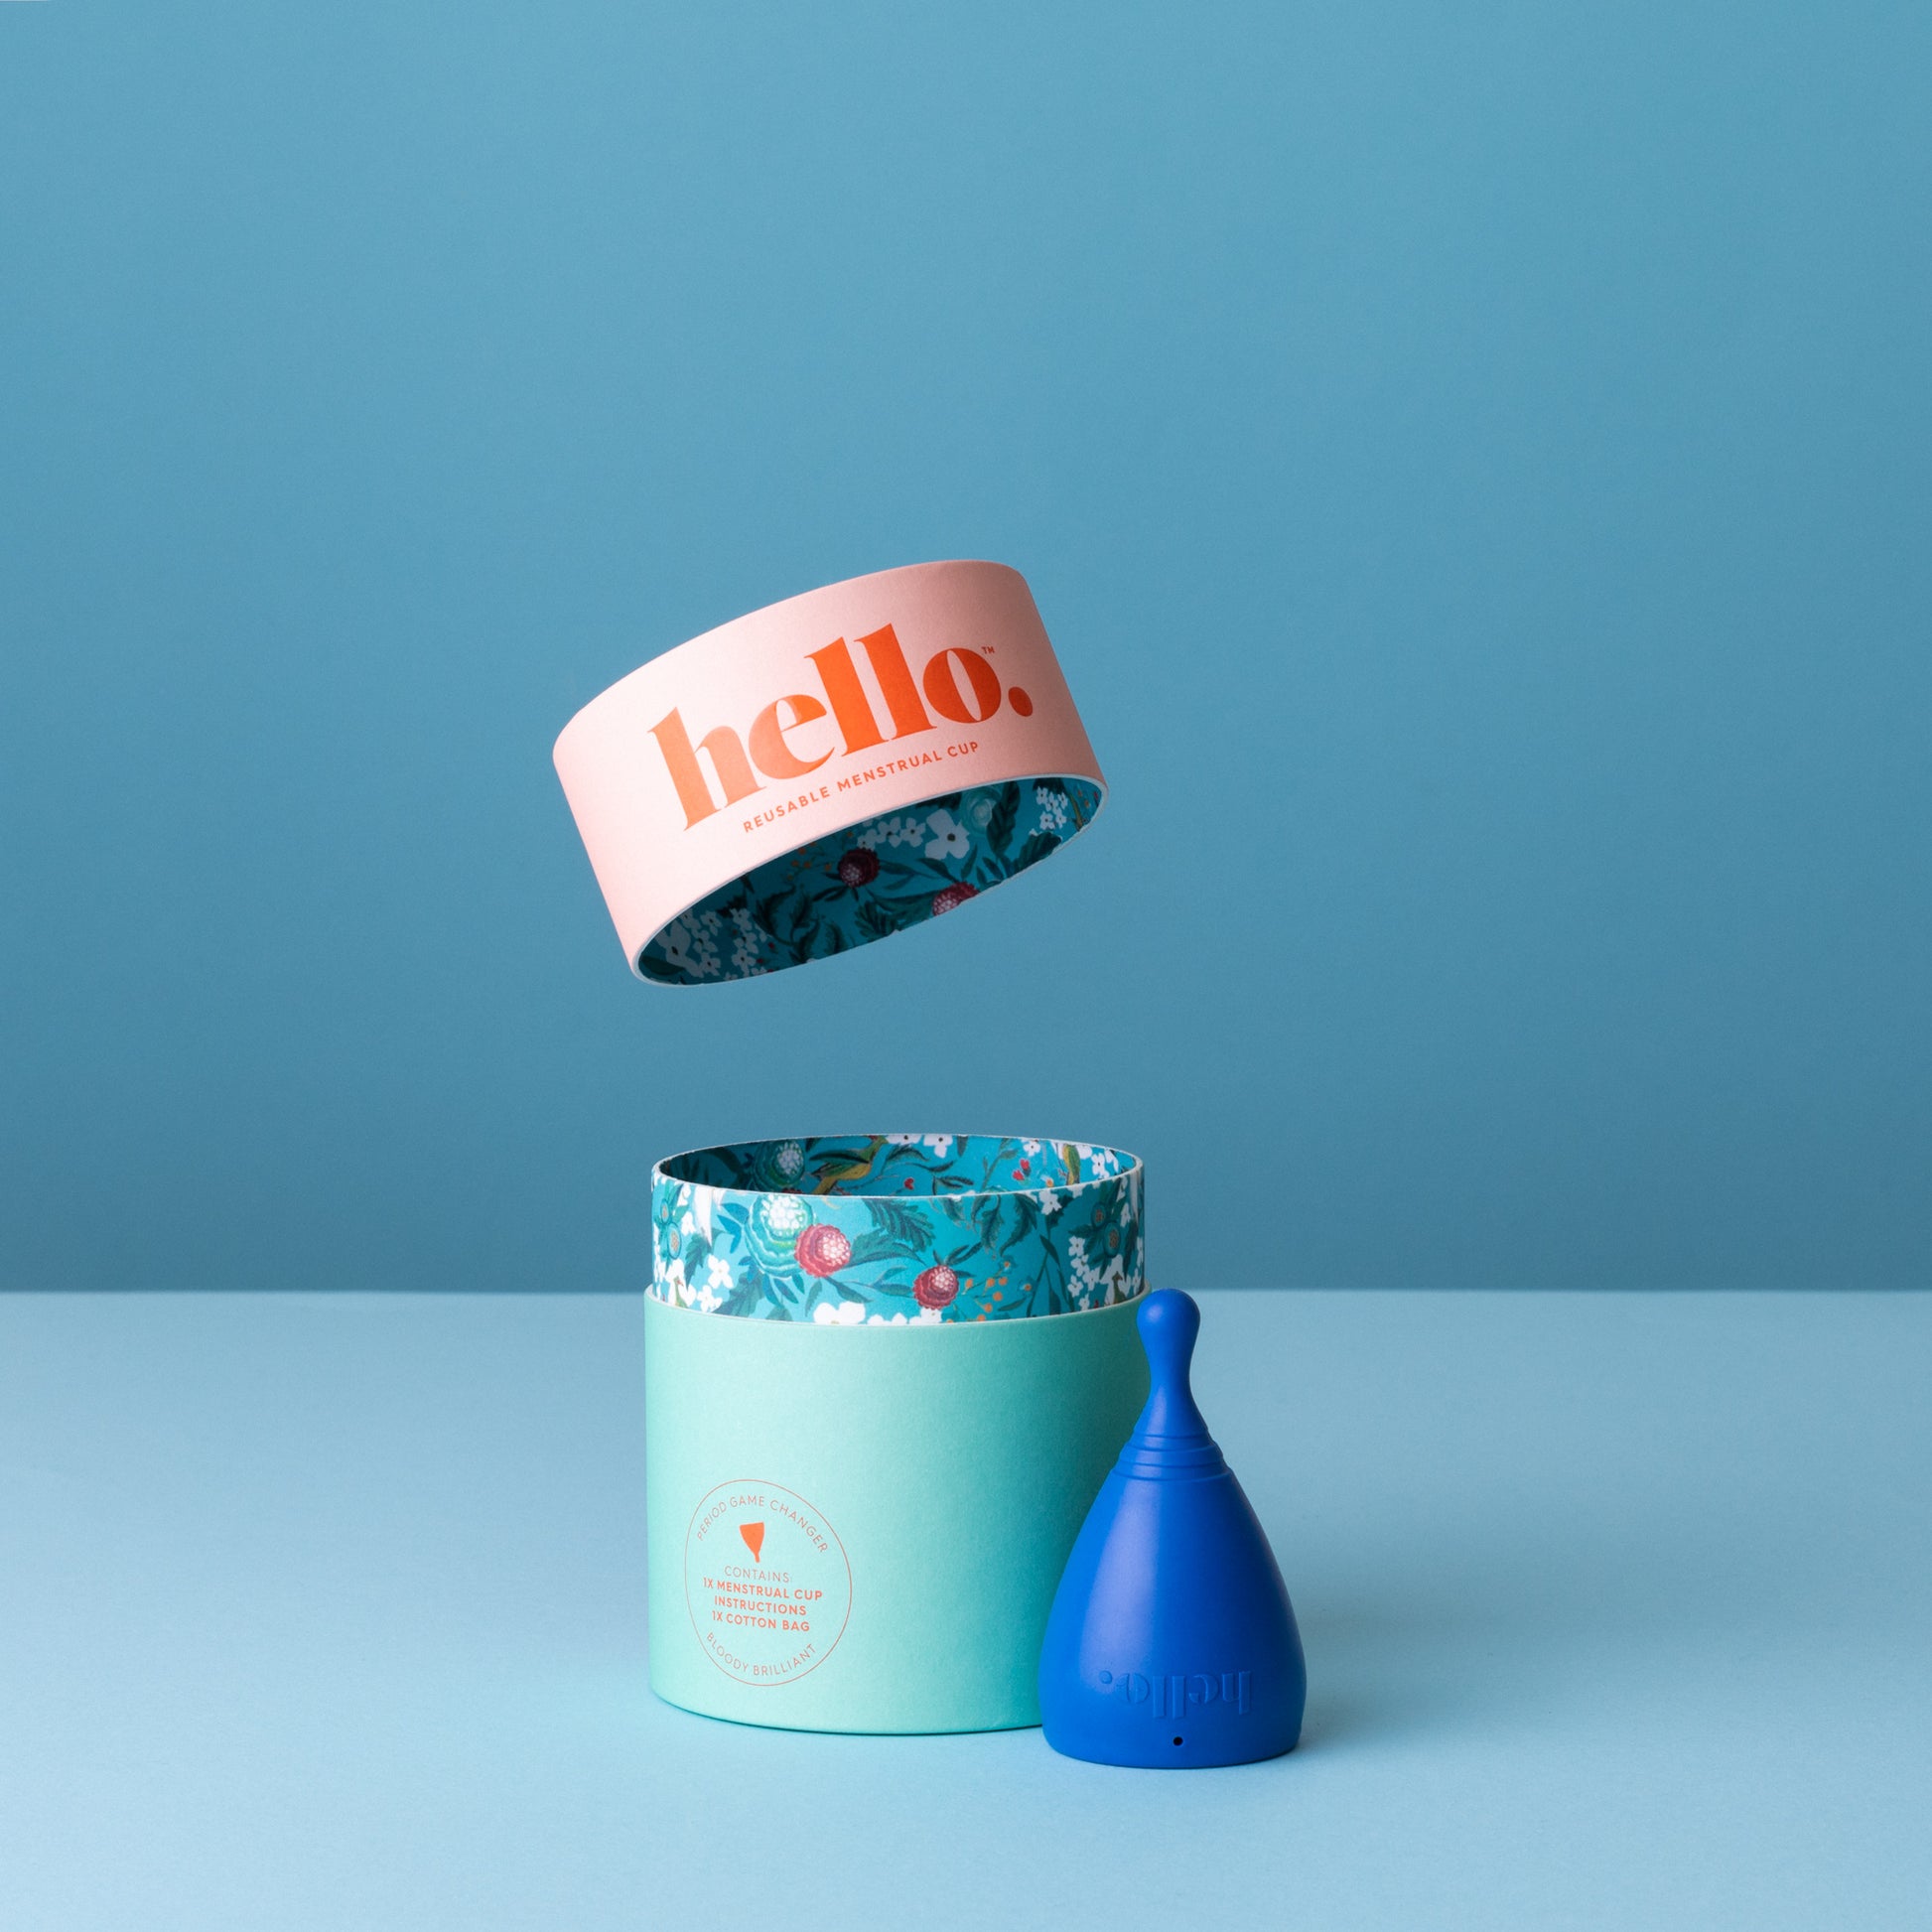 S/M Hello Cup High Cervix with papertube box on blue background